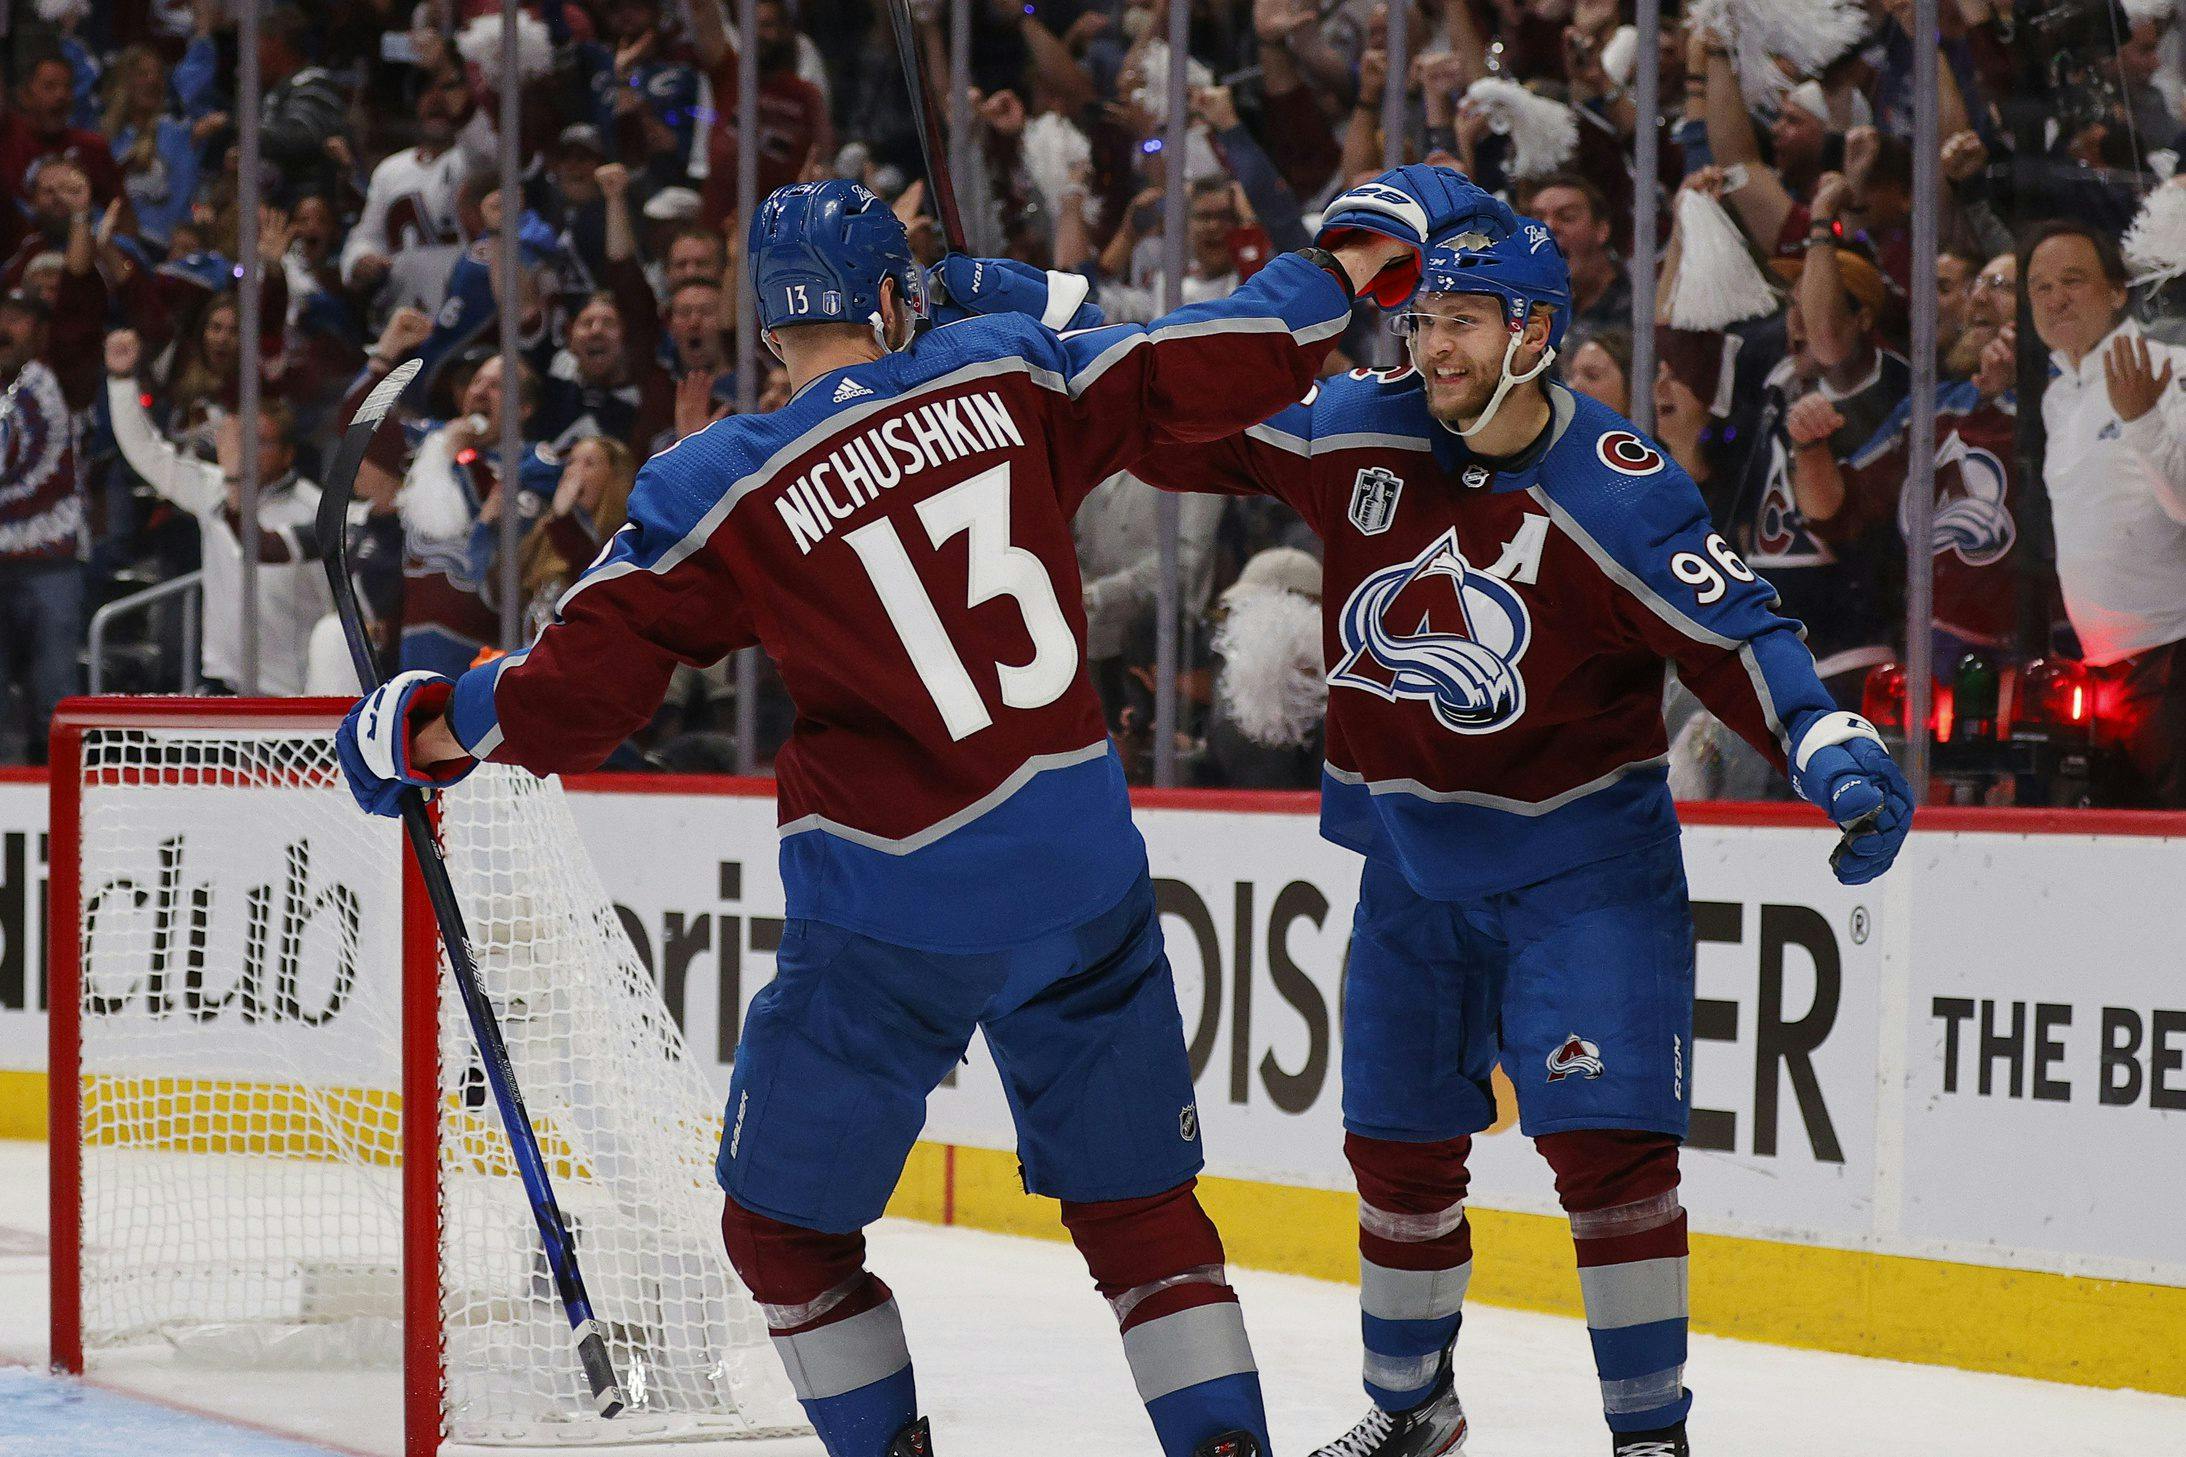 Stanley Cup Playoffs Day 48: Avalanche hold Lightning to 16 shots, win Game 2 in blowout fashion